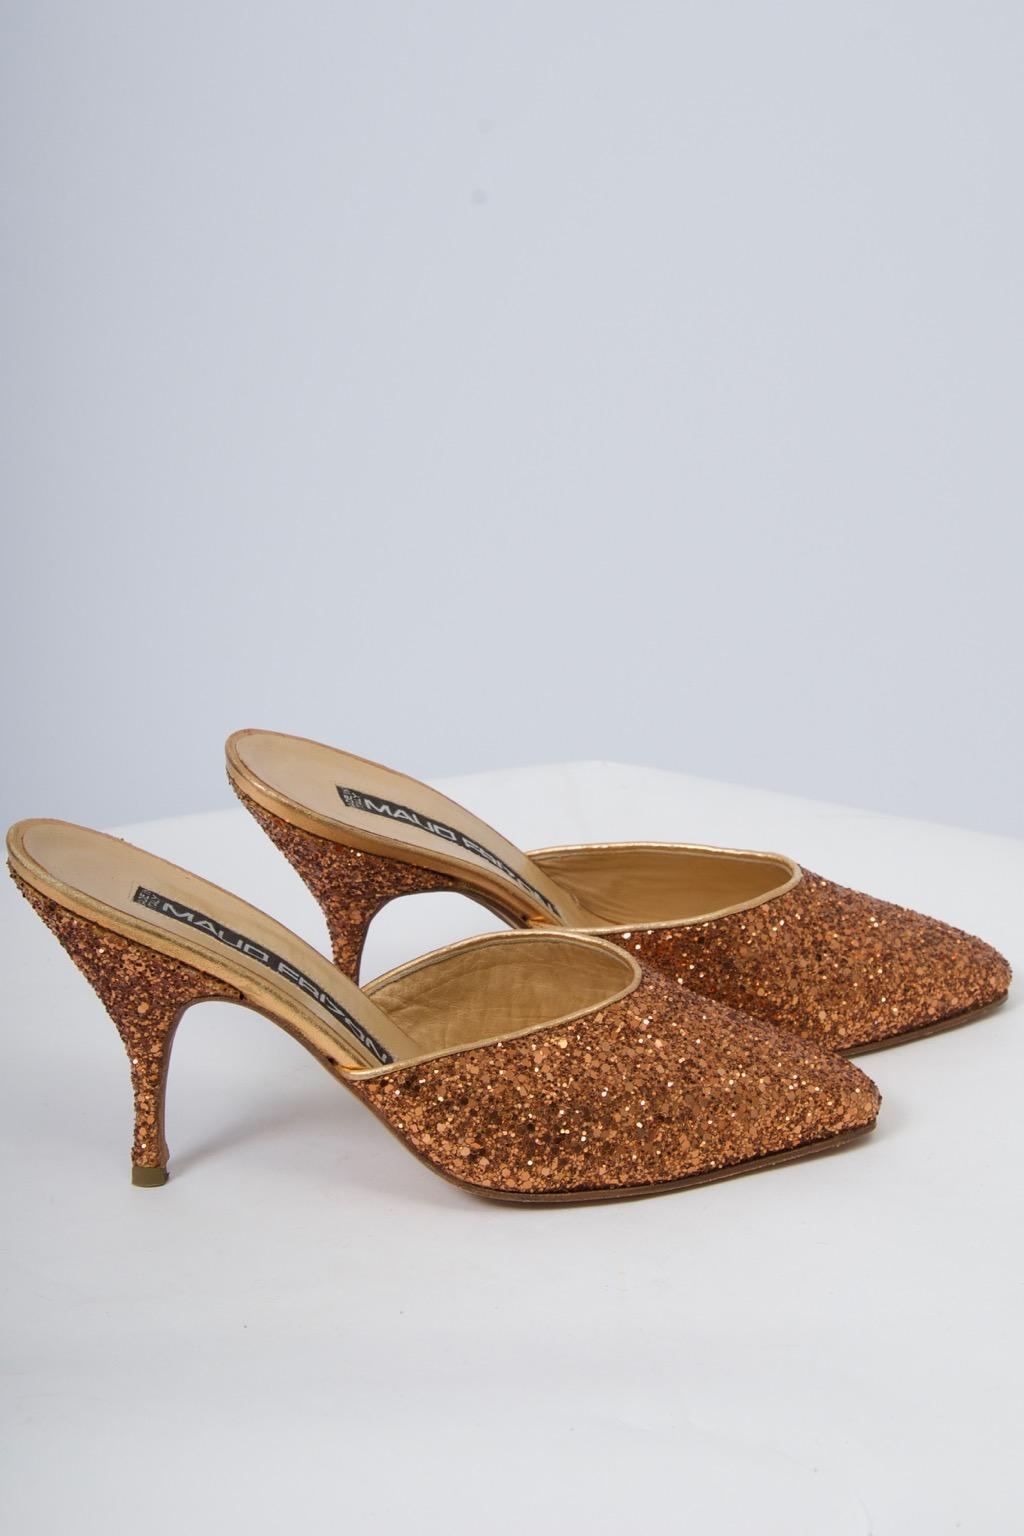 A great find, these Maud Frizon mules provide plenty of sparkle for the holidays and beyond. Edges bound in gold leather. Mid-size slender heel. Size 37. Never worn.